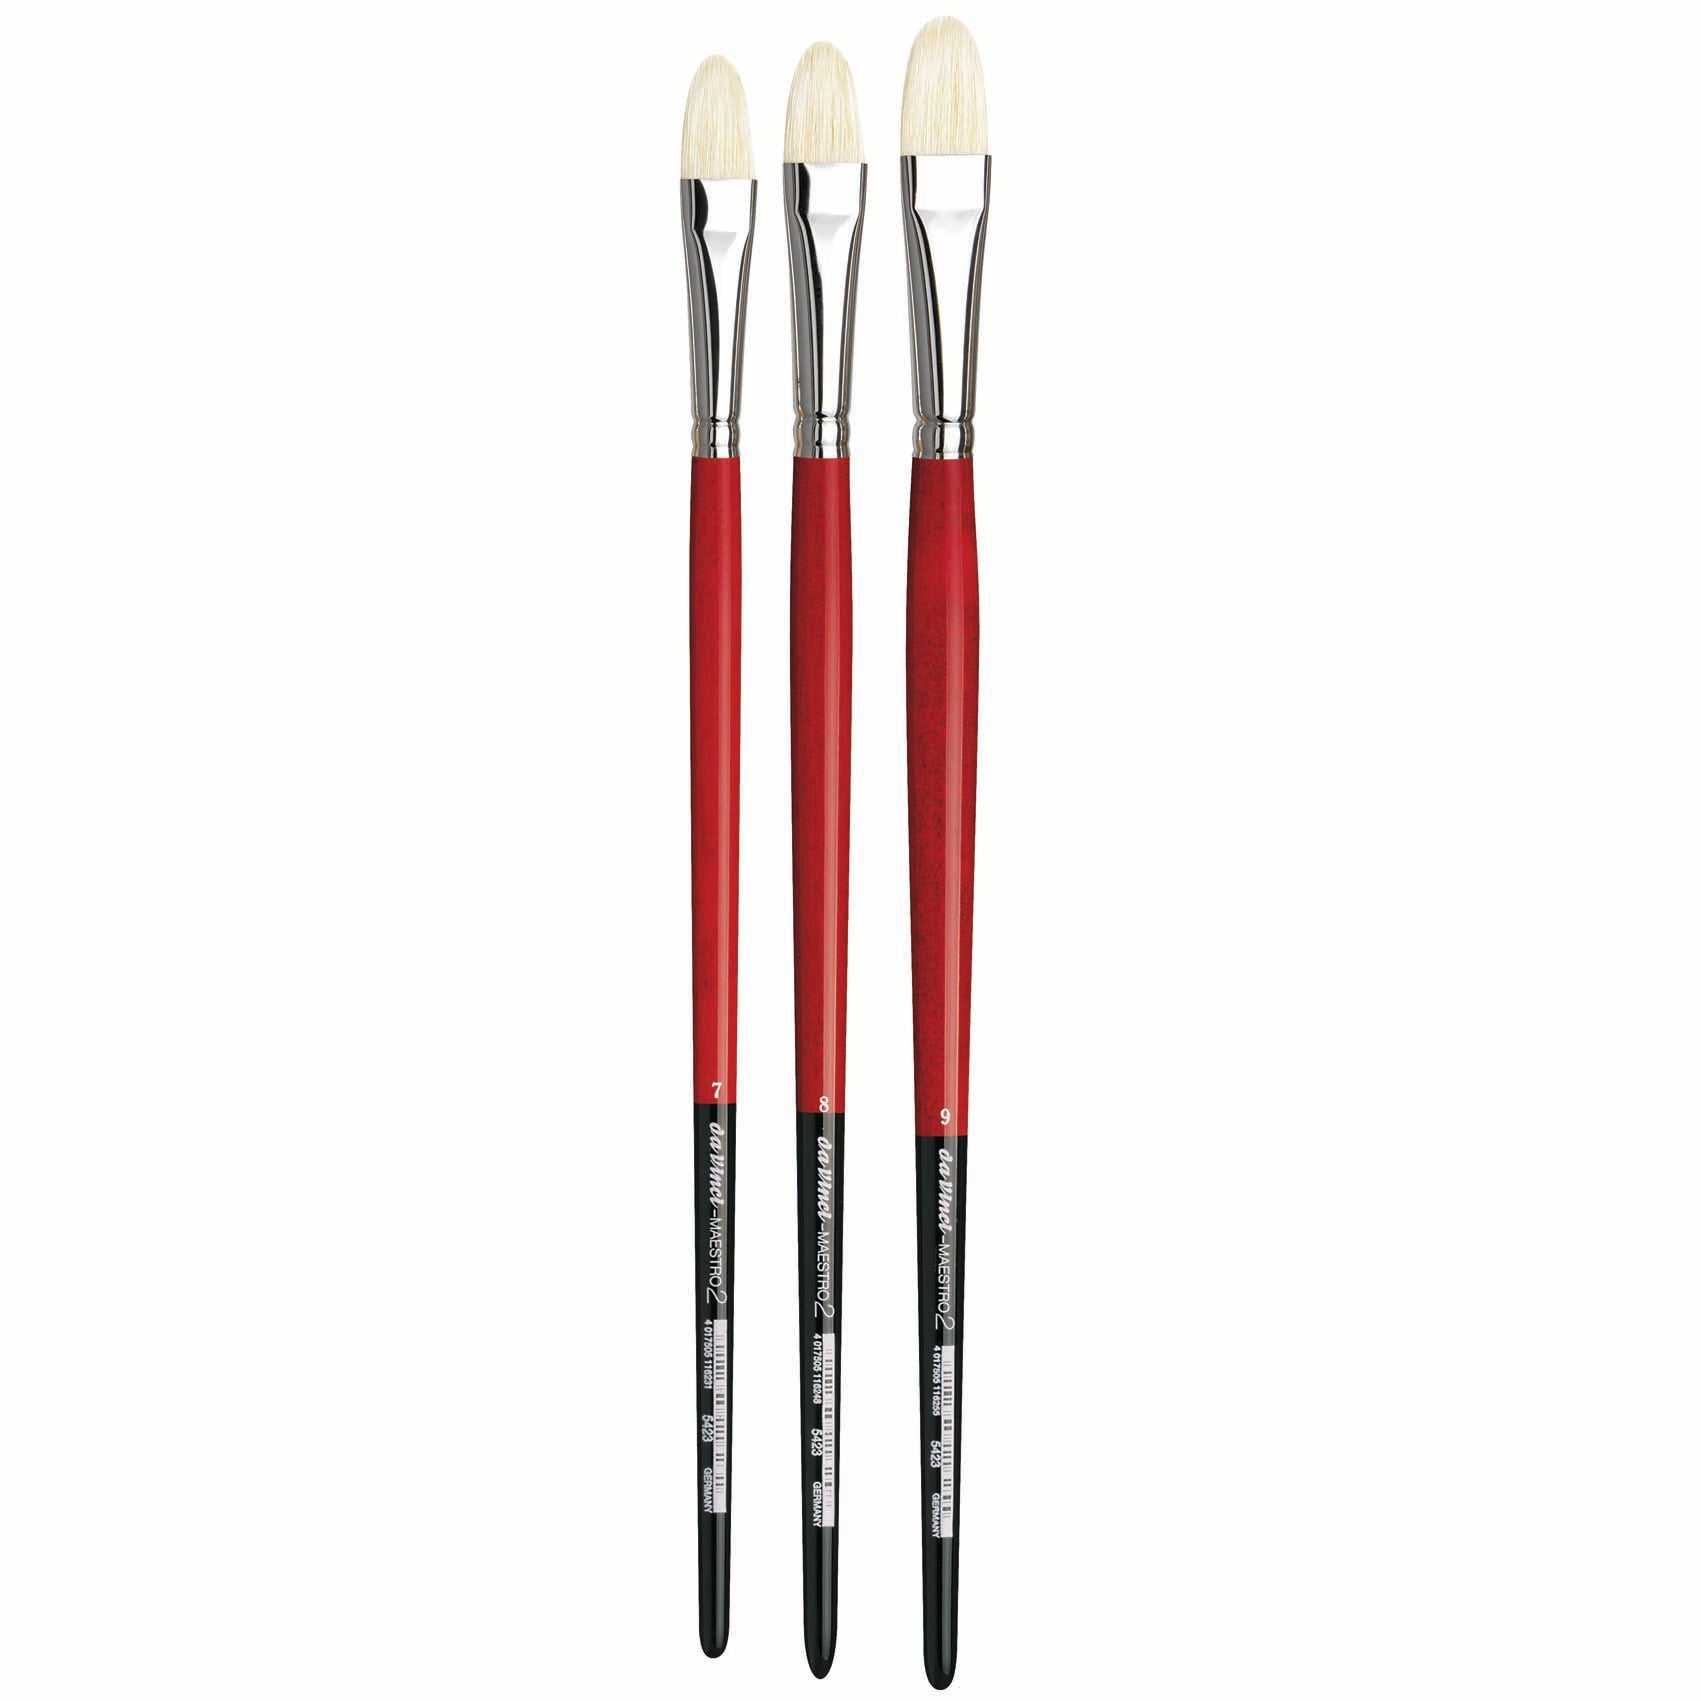 The Da Vinci Maestro 2 Bristle Brush is crafted by interlocking natural hog bristles deep into the ferrule, ensuring long-lasting elasticity, springiness, and durability. This design also allows the brush to hold colour exceptionally well. It features long red handles with black ends and silver ferrules, making it ideal for oil and acrylic painting. Additionally, its Filbert and Fresco shape makes it suitable for painting on wet, plastered surfaces and for mural painting on dry stucco.